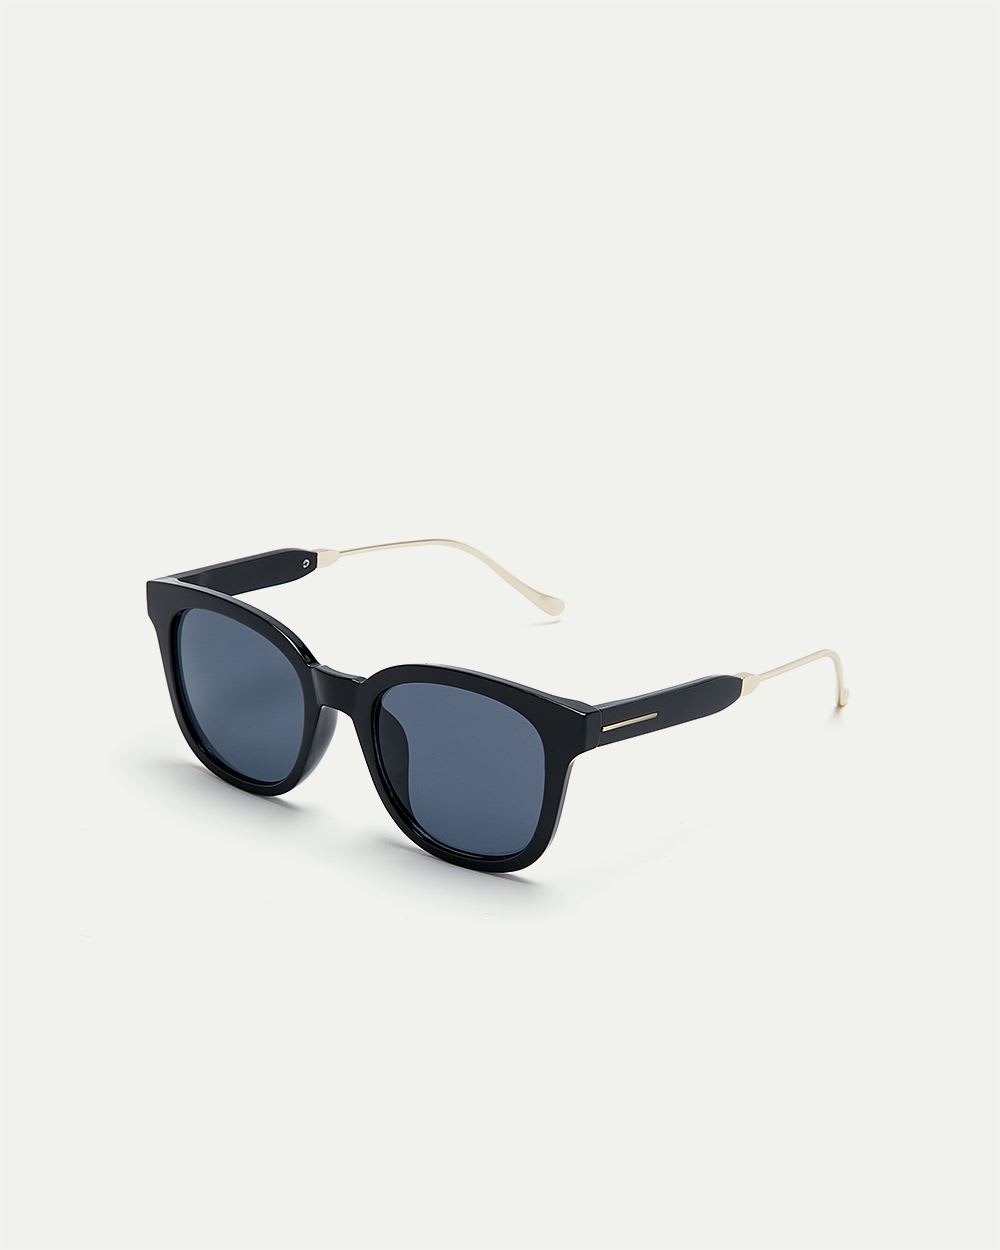 Black Sunglasses with Golden Ear Pieces